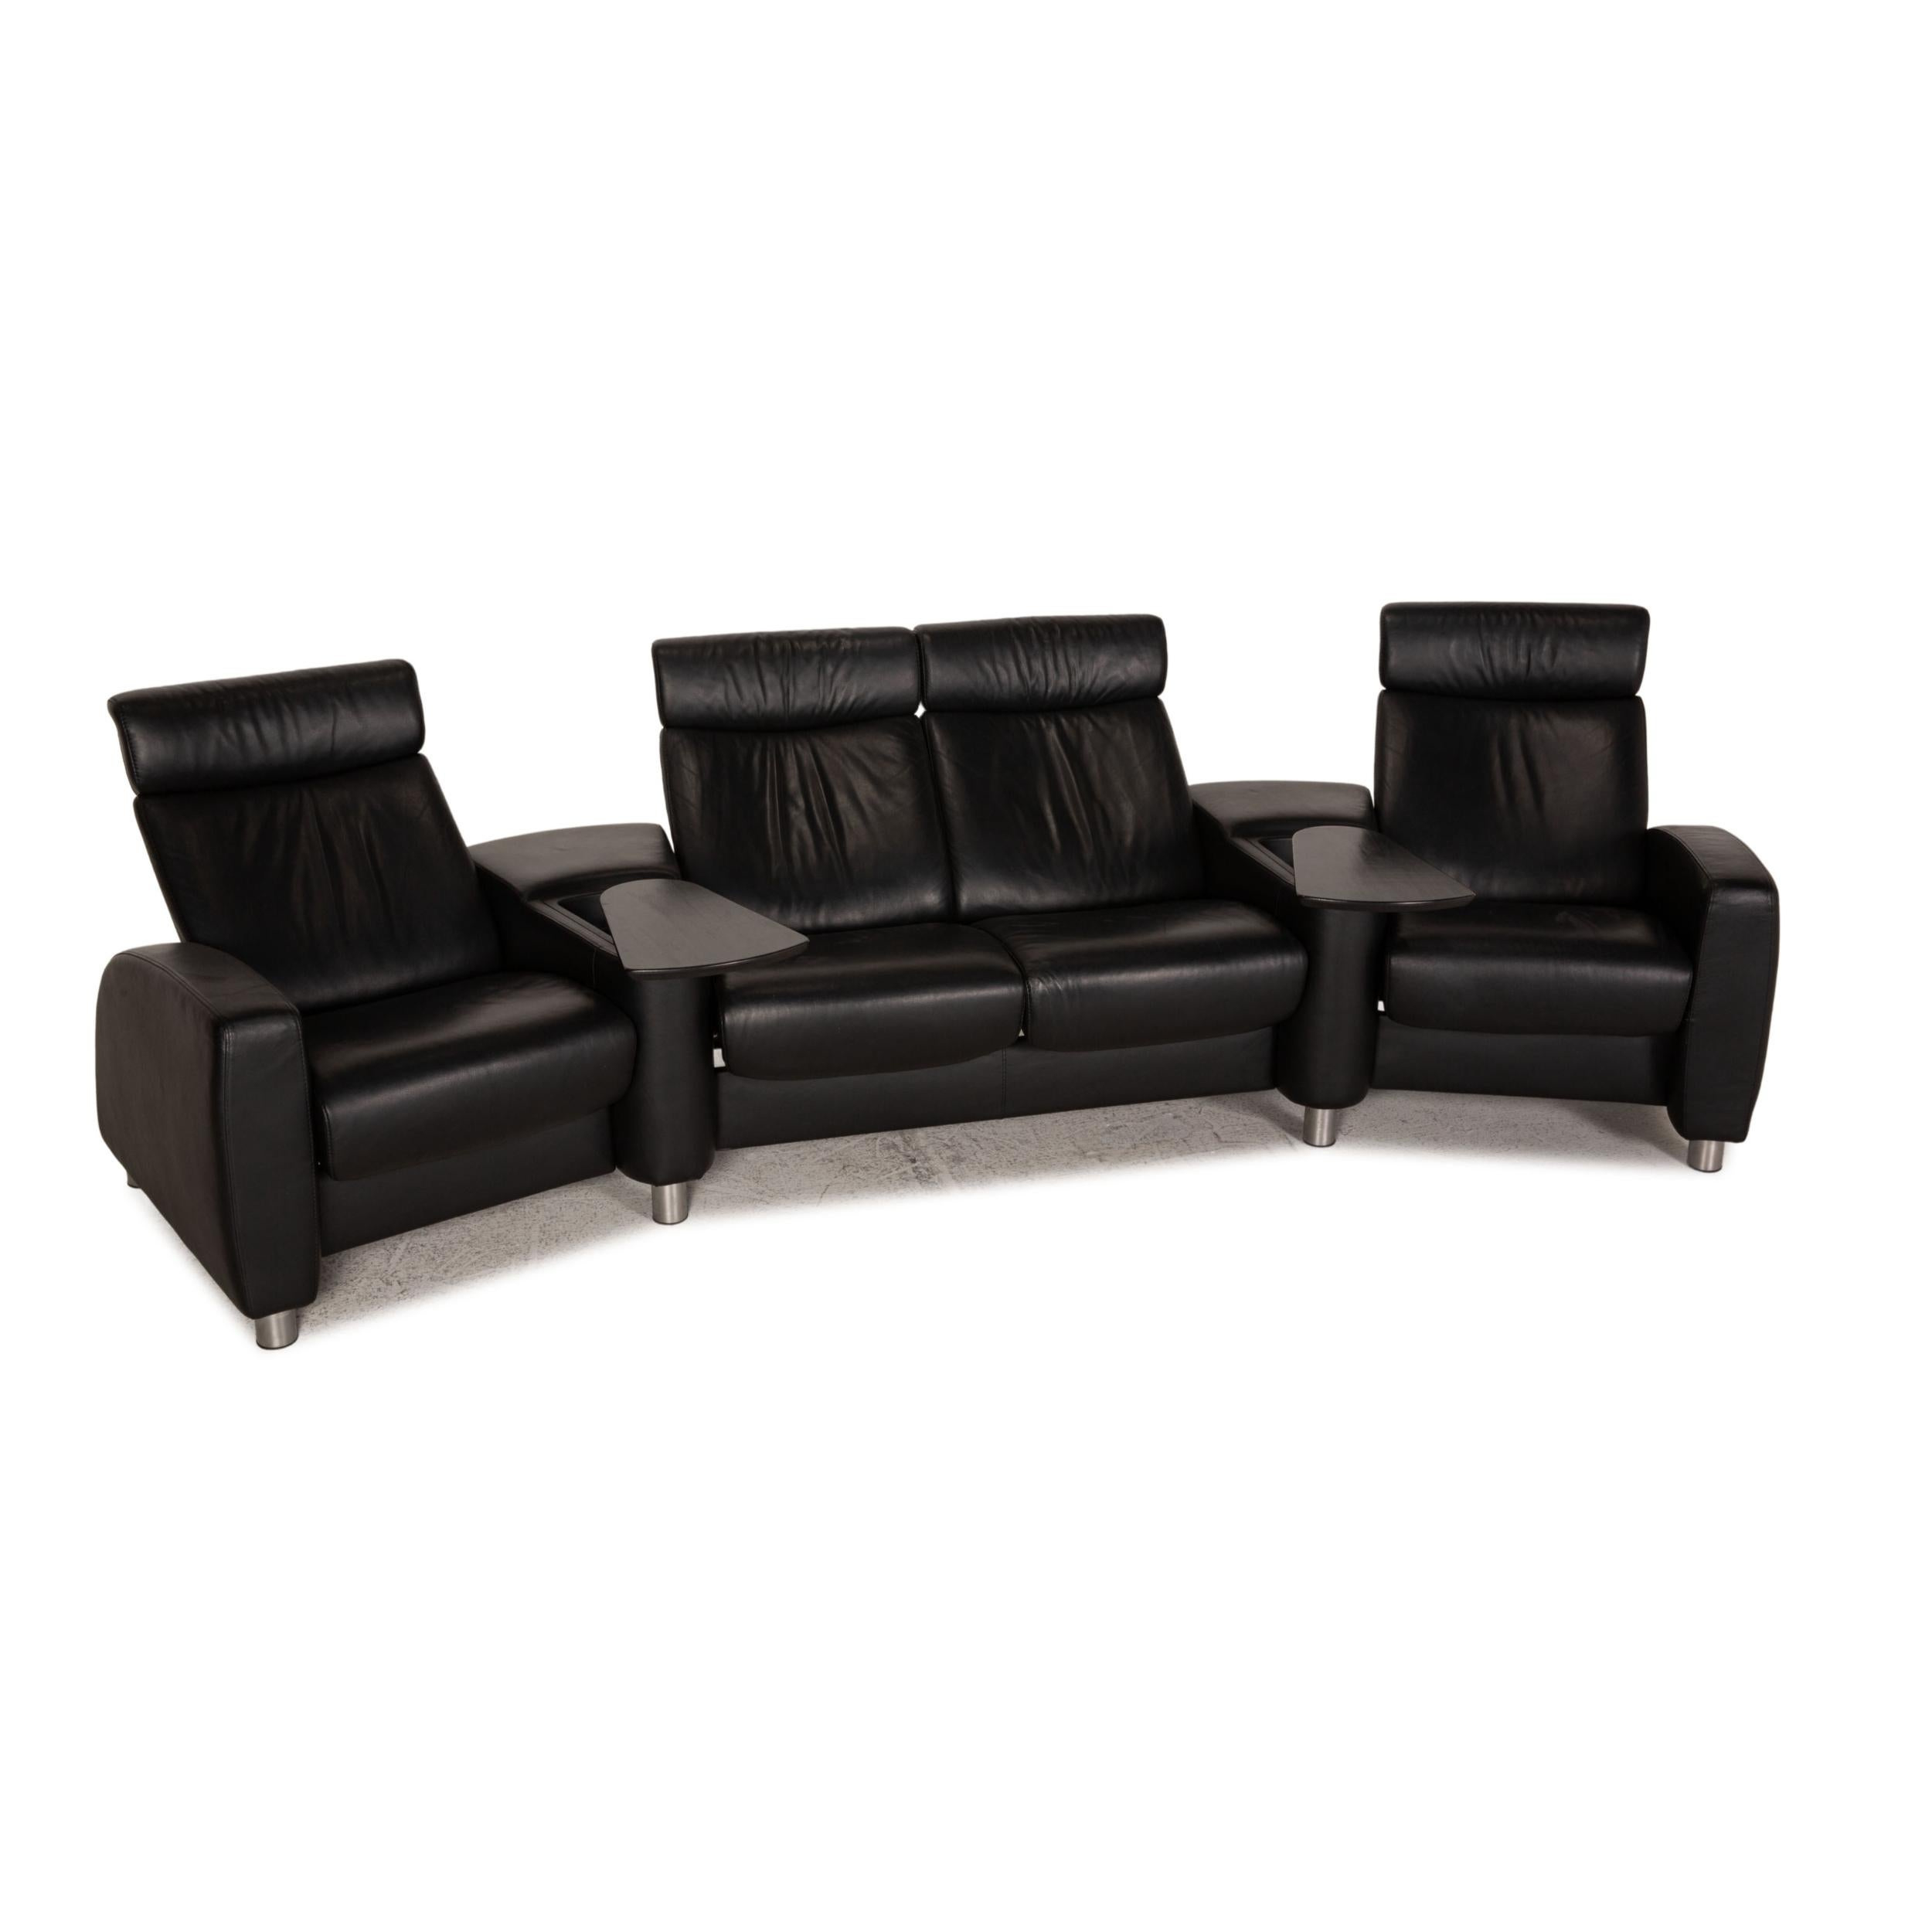 Modern Stressless Arion Leather Sofa Black Four Seater Couch Feature For Sale